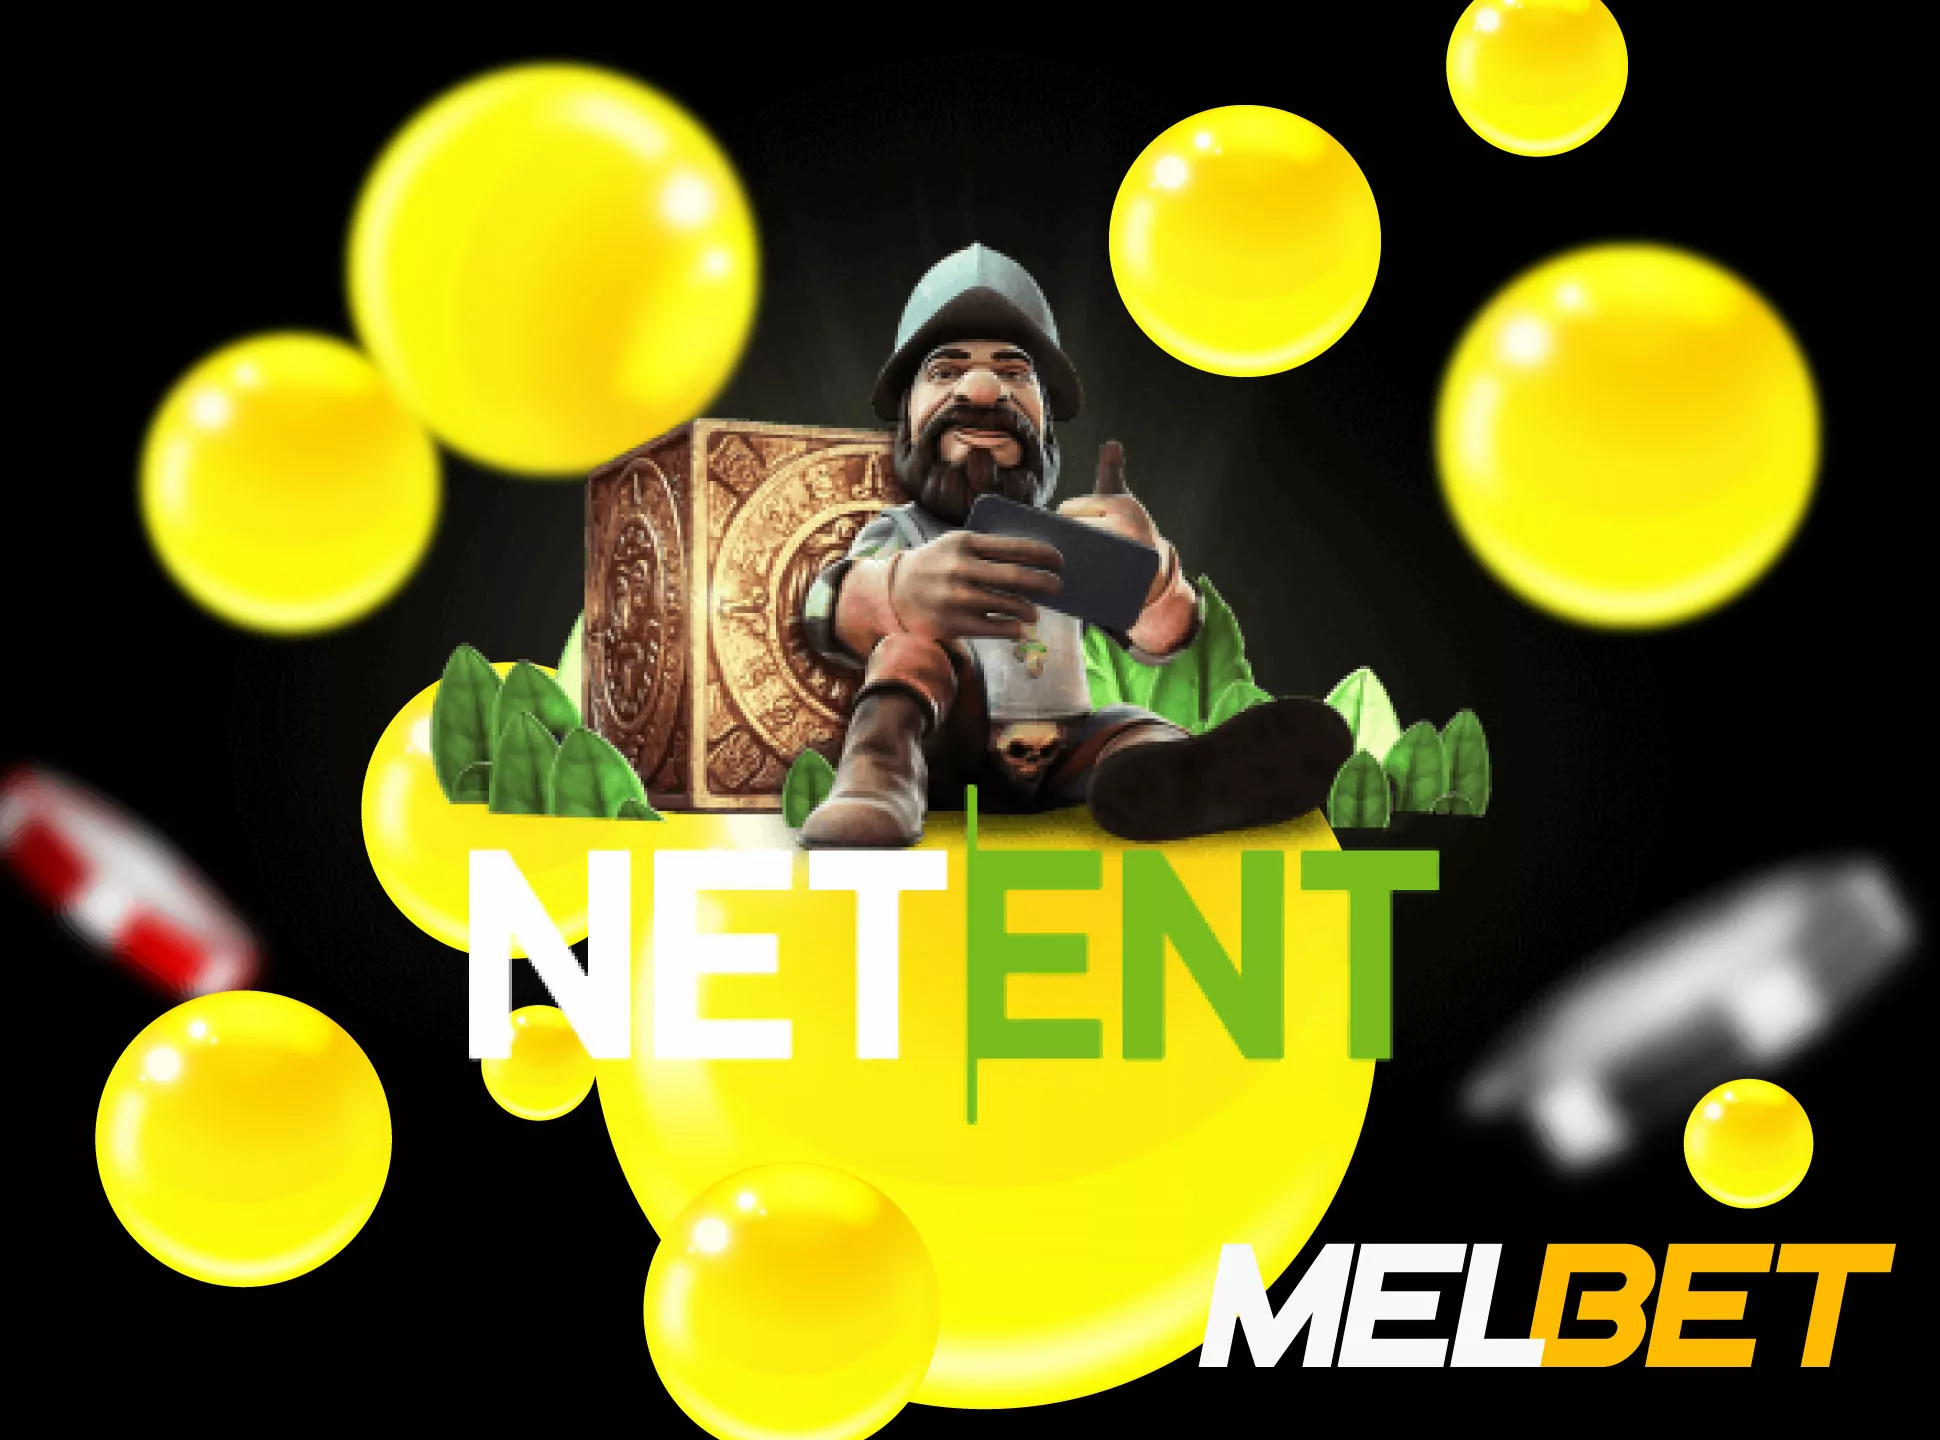 Netent is widest casino games provider.